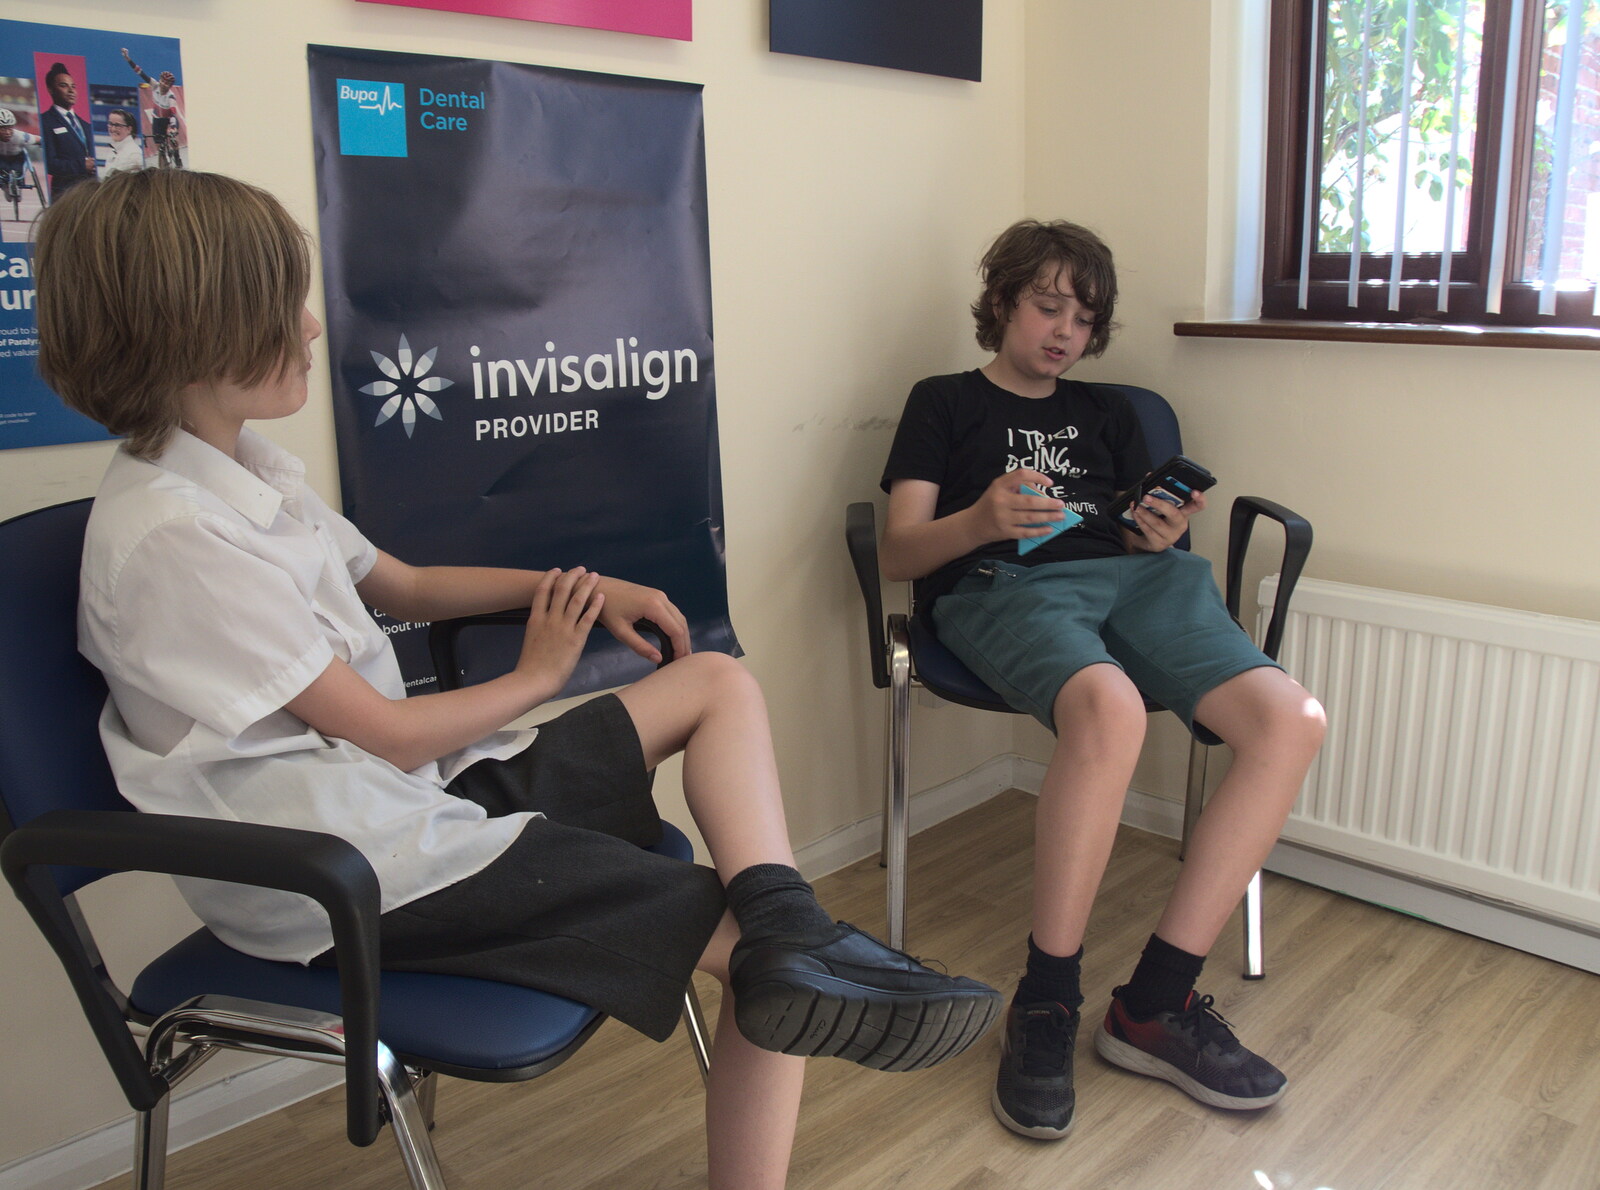 A July Miscellany, Diss, Eye and Norwich - 23rd July 2022: The boys wait for a dentist appointment